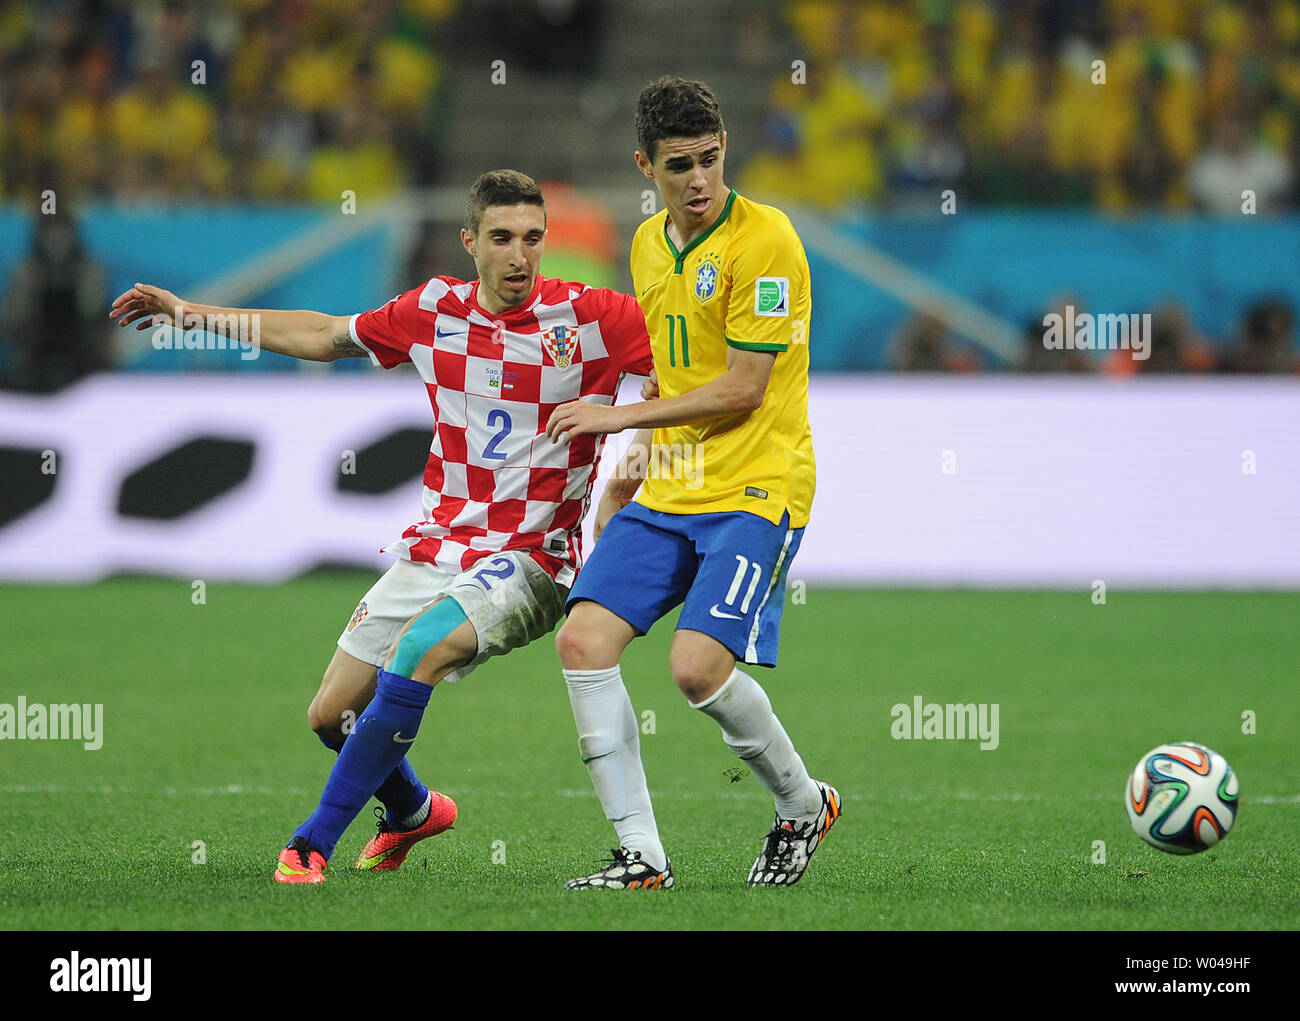 Oscar (R) of Brazil in action with Sime Vrsaljko of Croatia during the 2014 FIFA World Cup Group A match at the Arena Corinthians in Sao Paulo, Brazil on June 12, 2014. UPI/Chris Brunskill Stock Photo